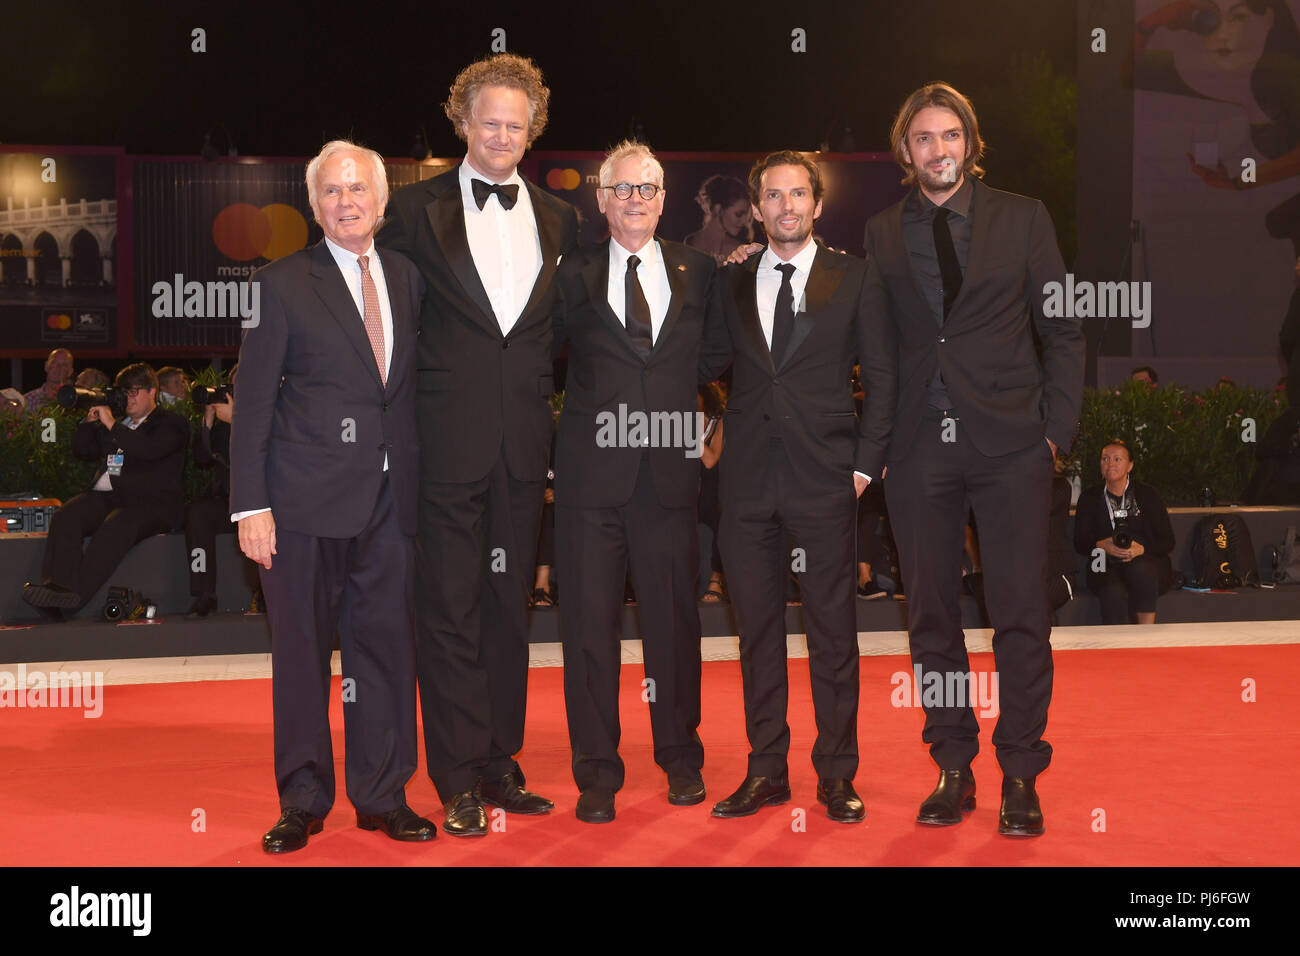 04.09.2018, Italy, Venice: Producer Jan Mojto (l-r), director Florian Henckel von Donnersmarck, cameraman Caleb Deschanel and producers Quirin Berg and Max Wiedemann can be seen at the premiere of the film 'Work Without Author' (Never Look Away) at the Venice Film Festival on the red carpet. The film festival runs from 29 August to 8 September and is taking place for the 75th time this year. Photo: Felix Hörhager/dpa Stock Photo